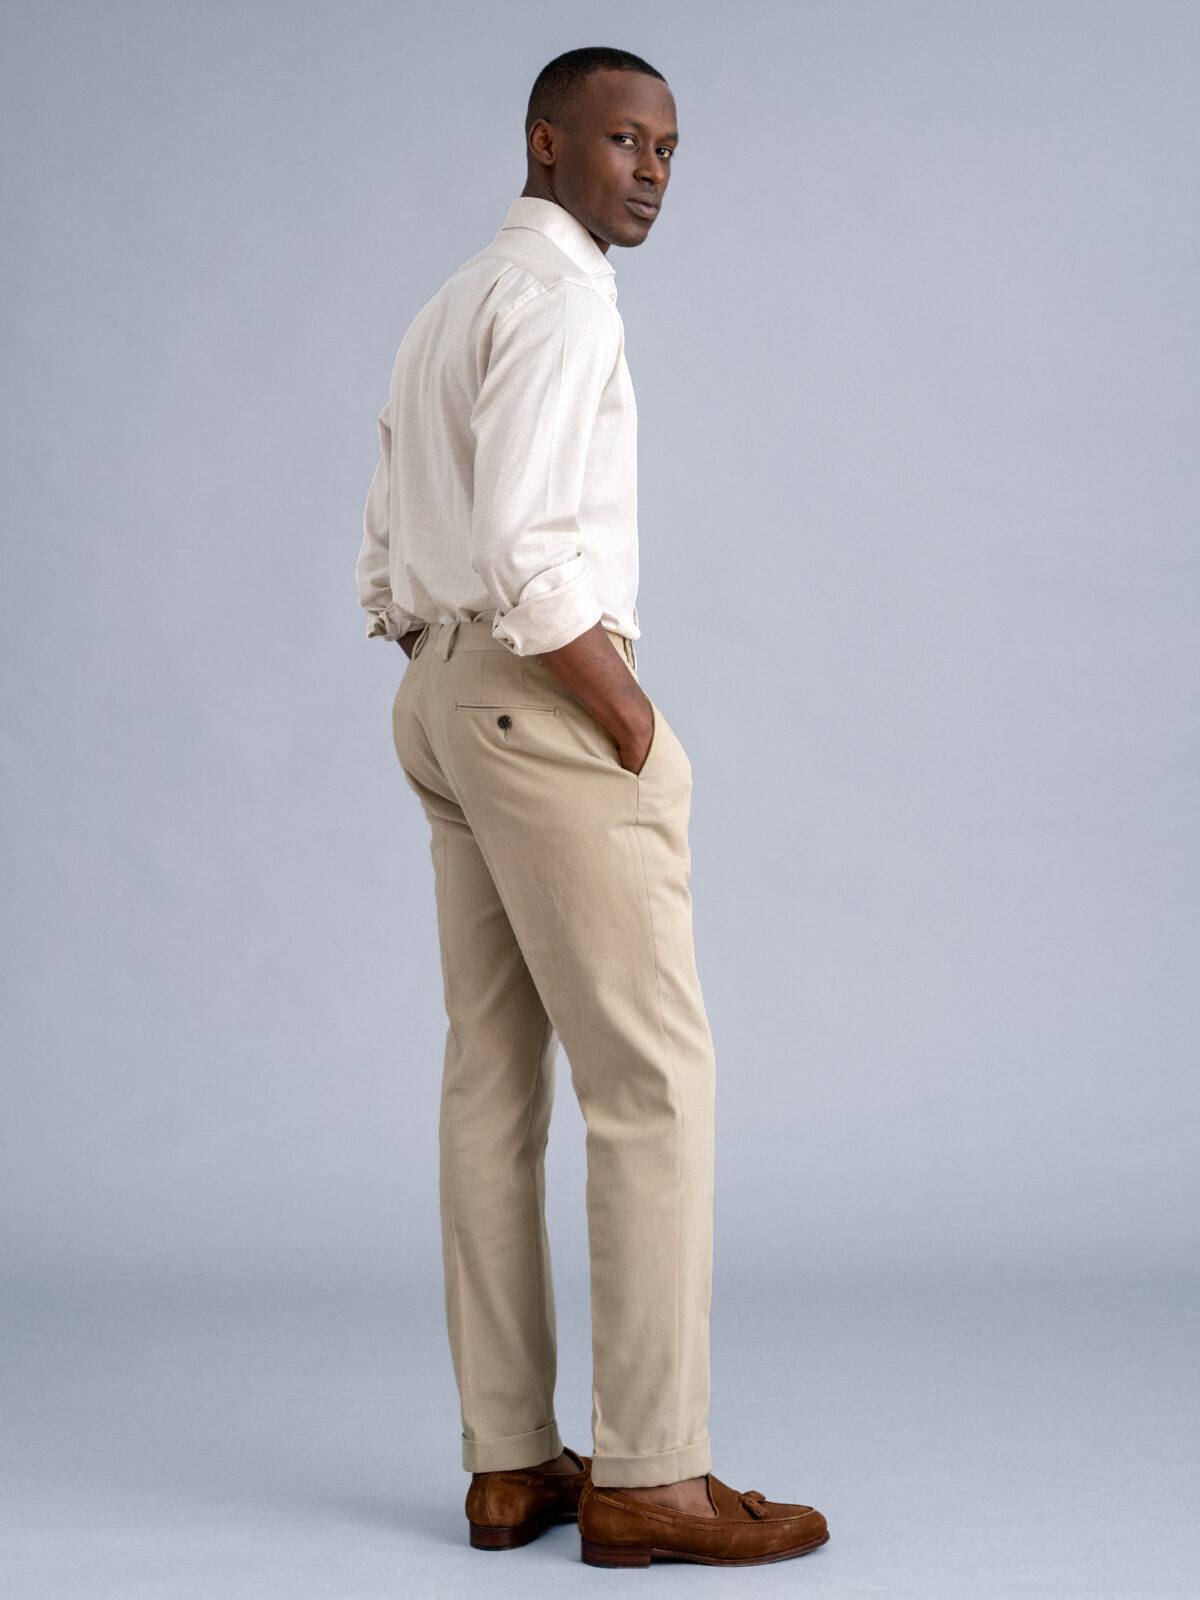 Men's Solid Brushed Cotton Shirt in Taupe - Thursday